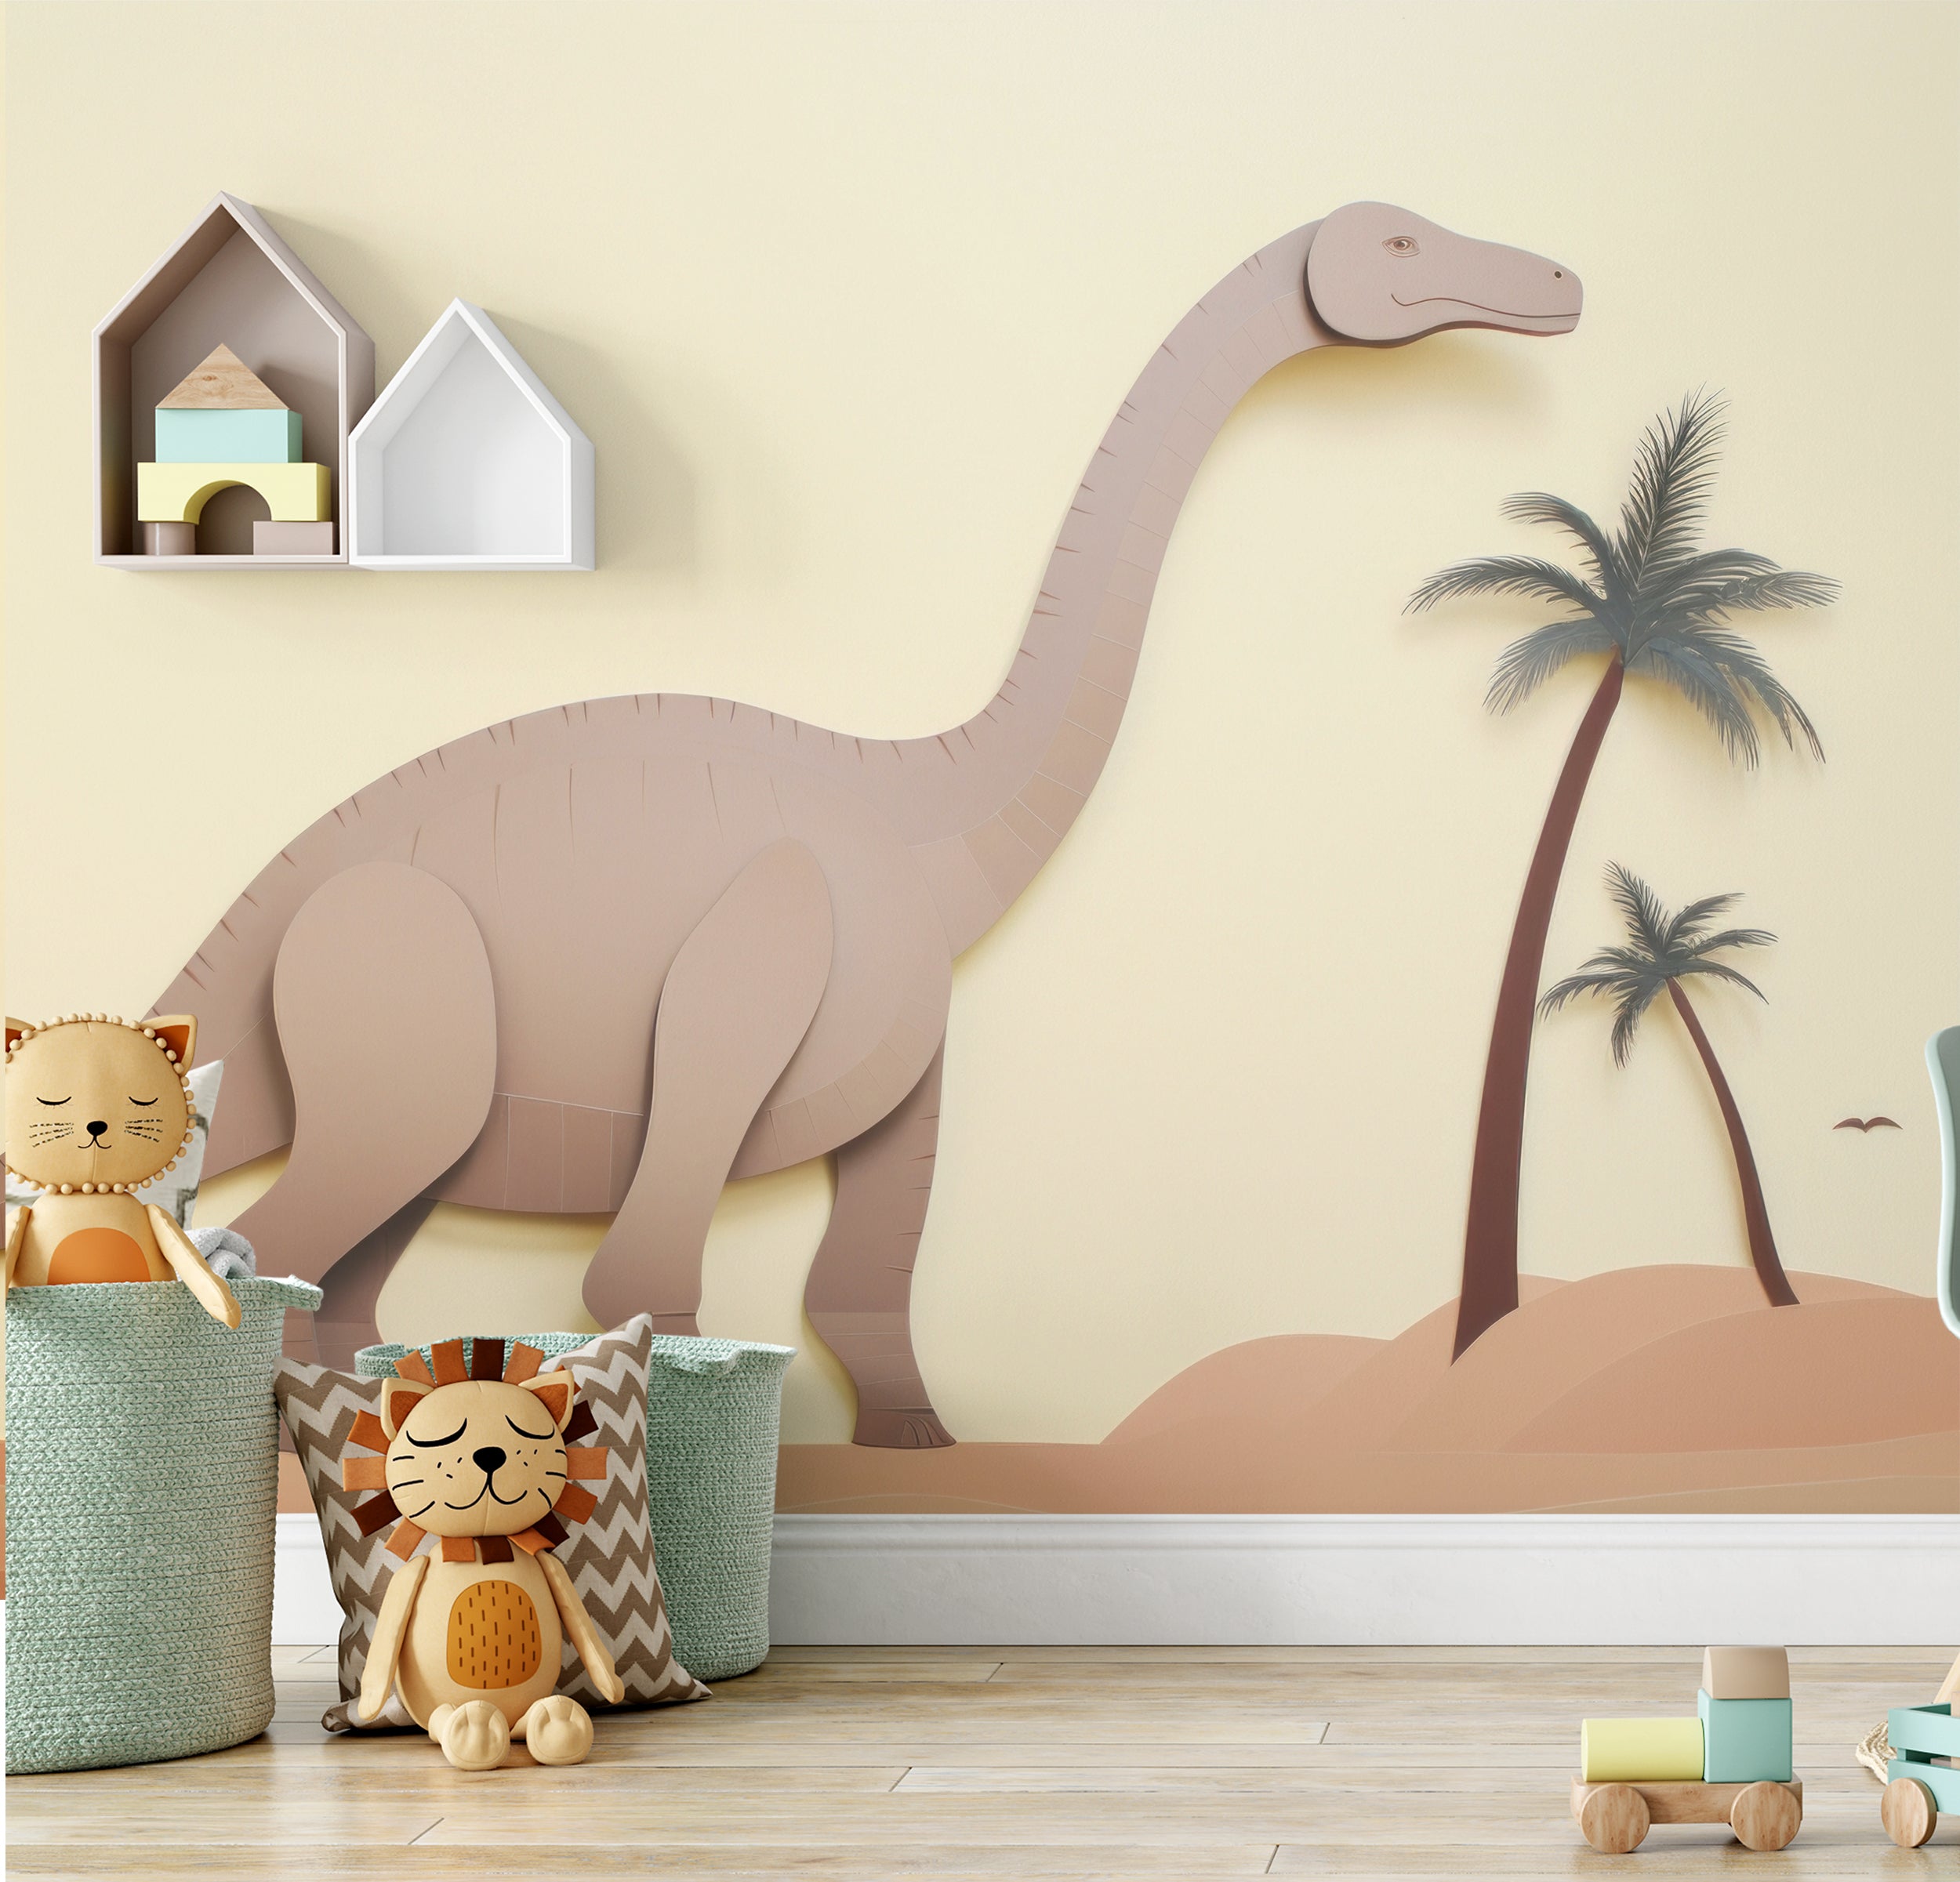 "Children's room wall mural featuring a cartoon dinosaur in a pastel-colored prehistoric setting."